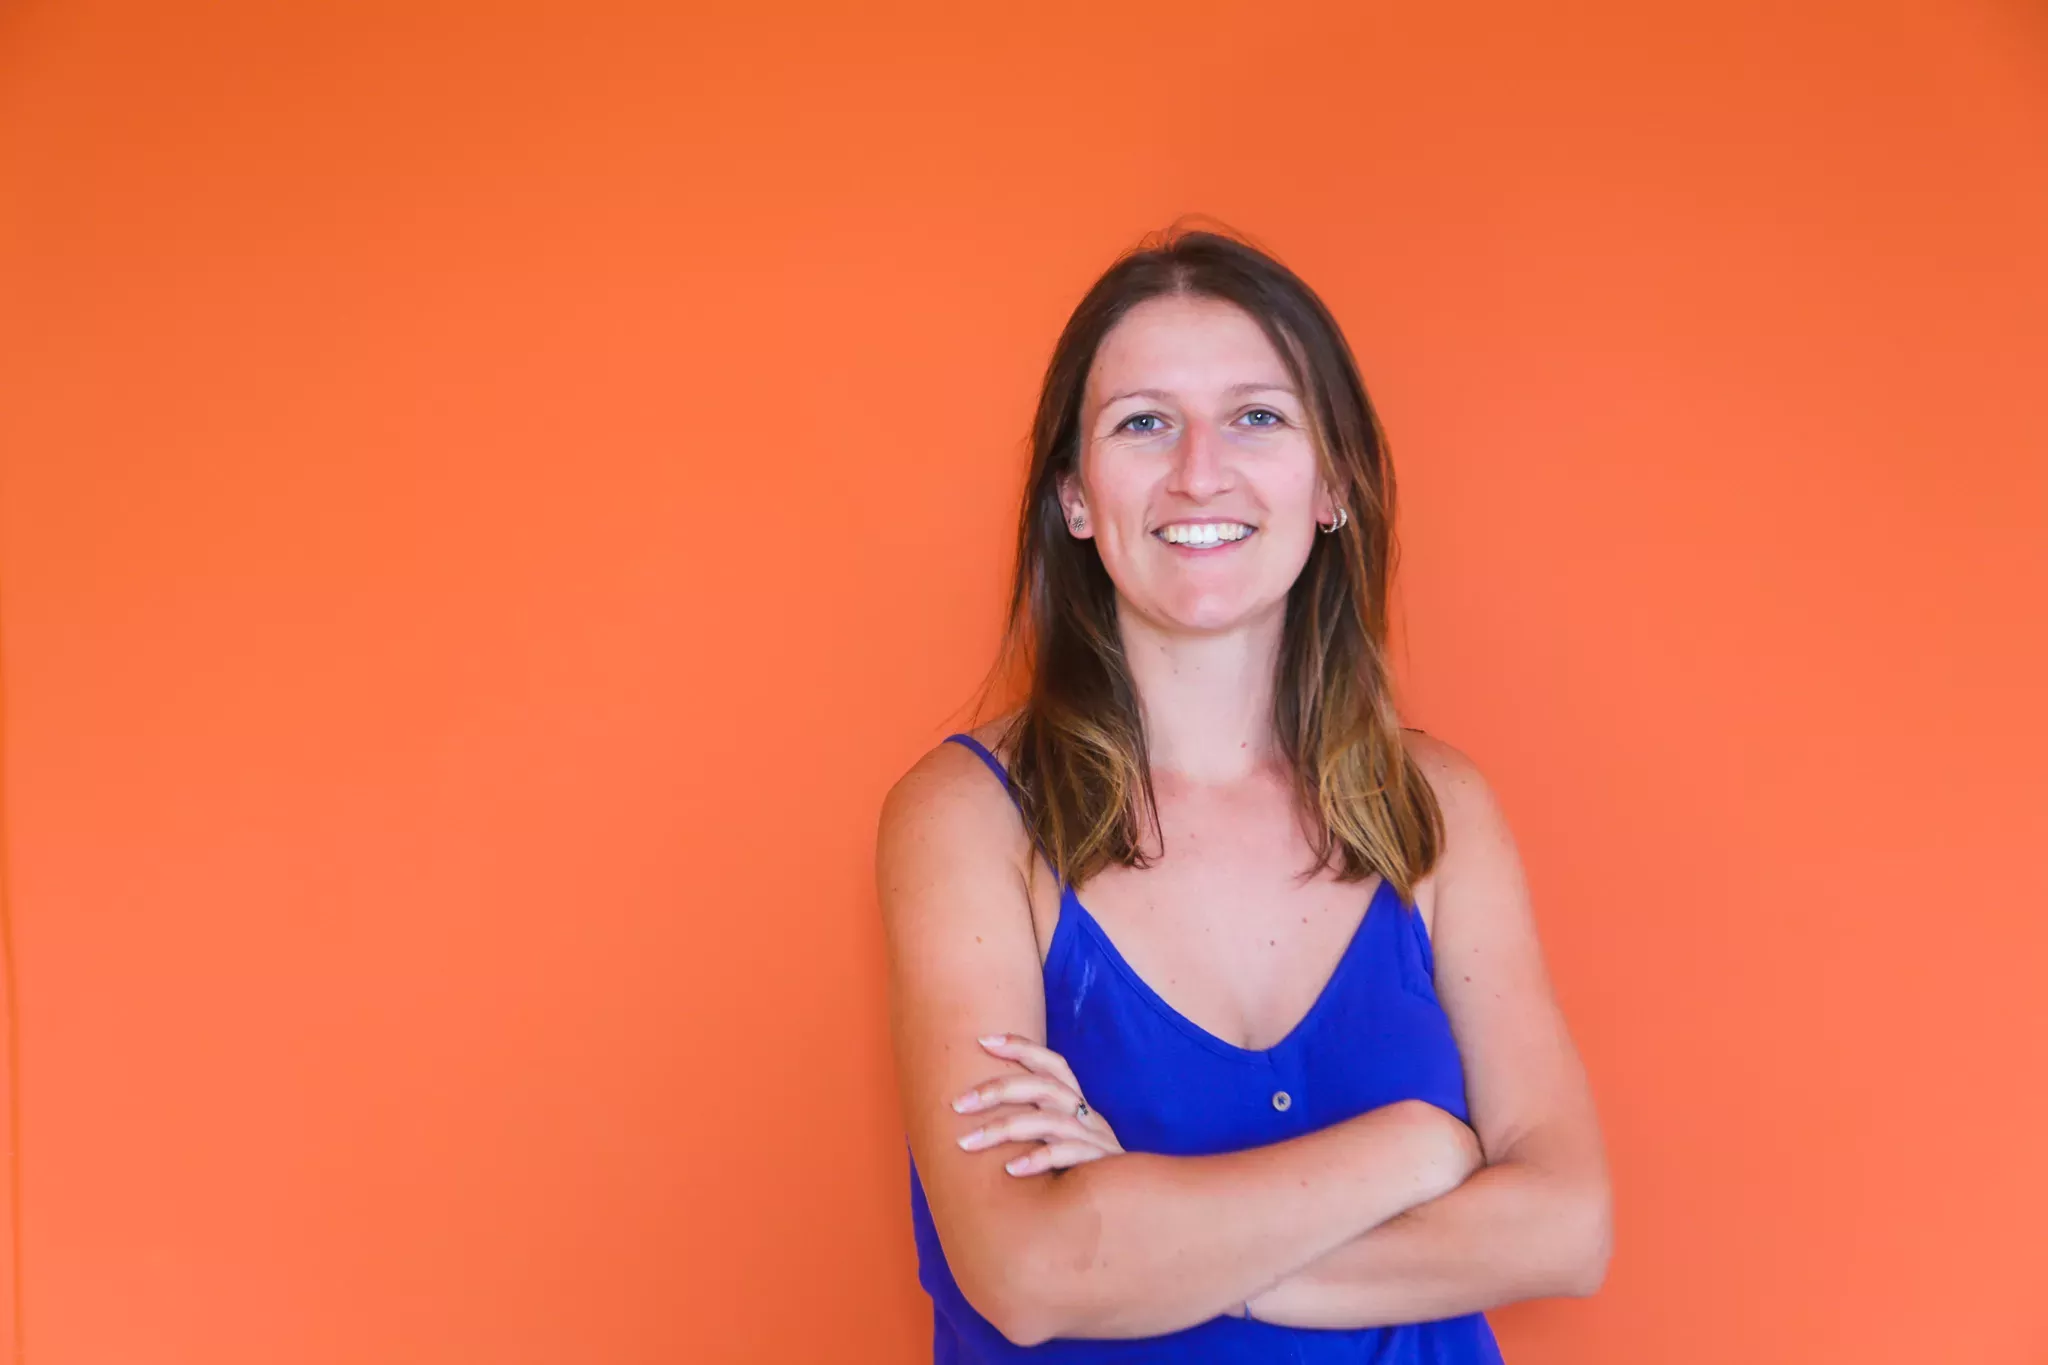 Woman in blue top smiling, arms crossed, standing against an orange background.